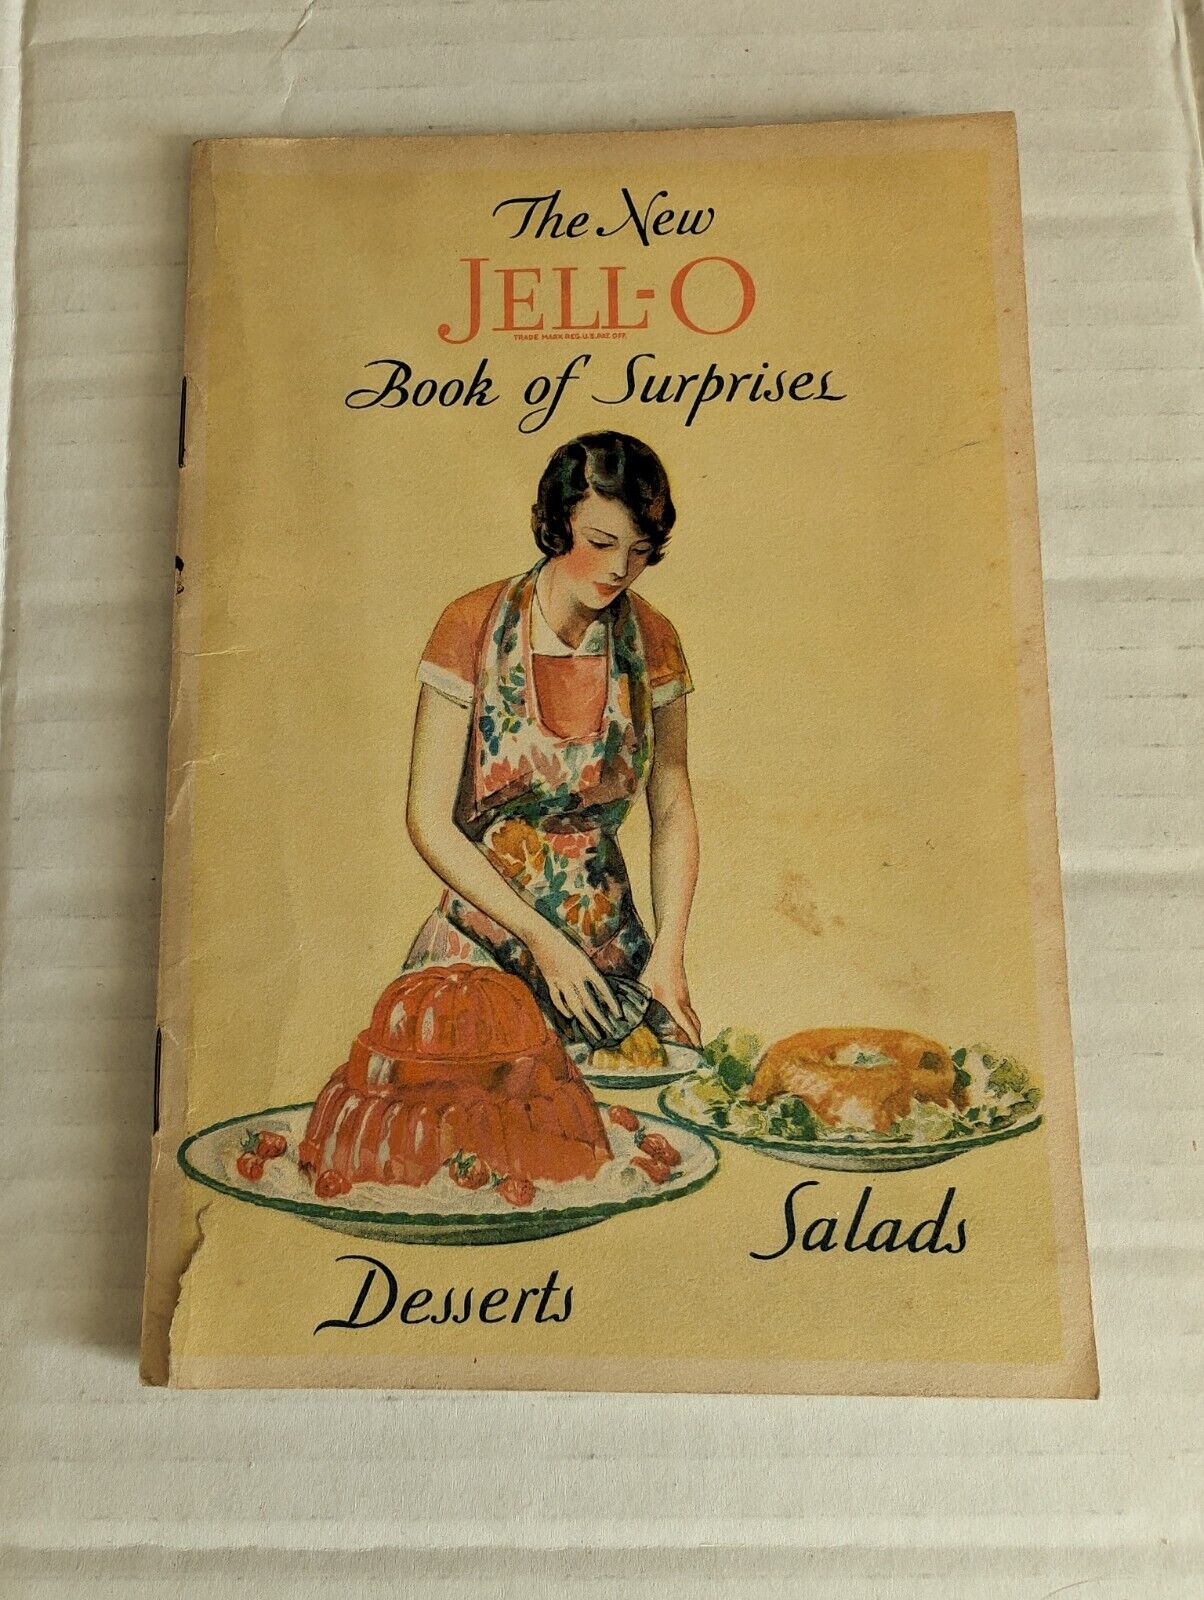 The New Jell-O Book Of Surprises Desserts Salads 1930 Vtg Cookbook Advertising 